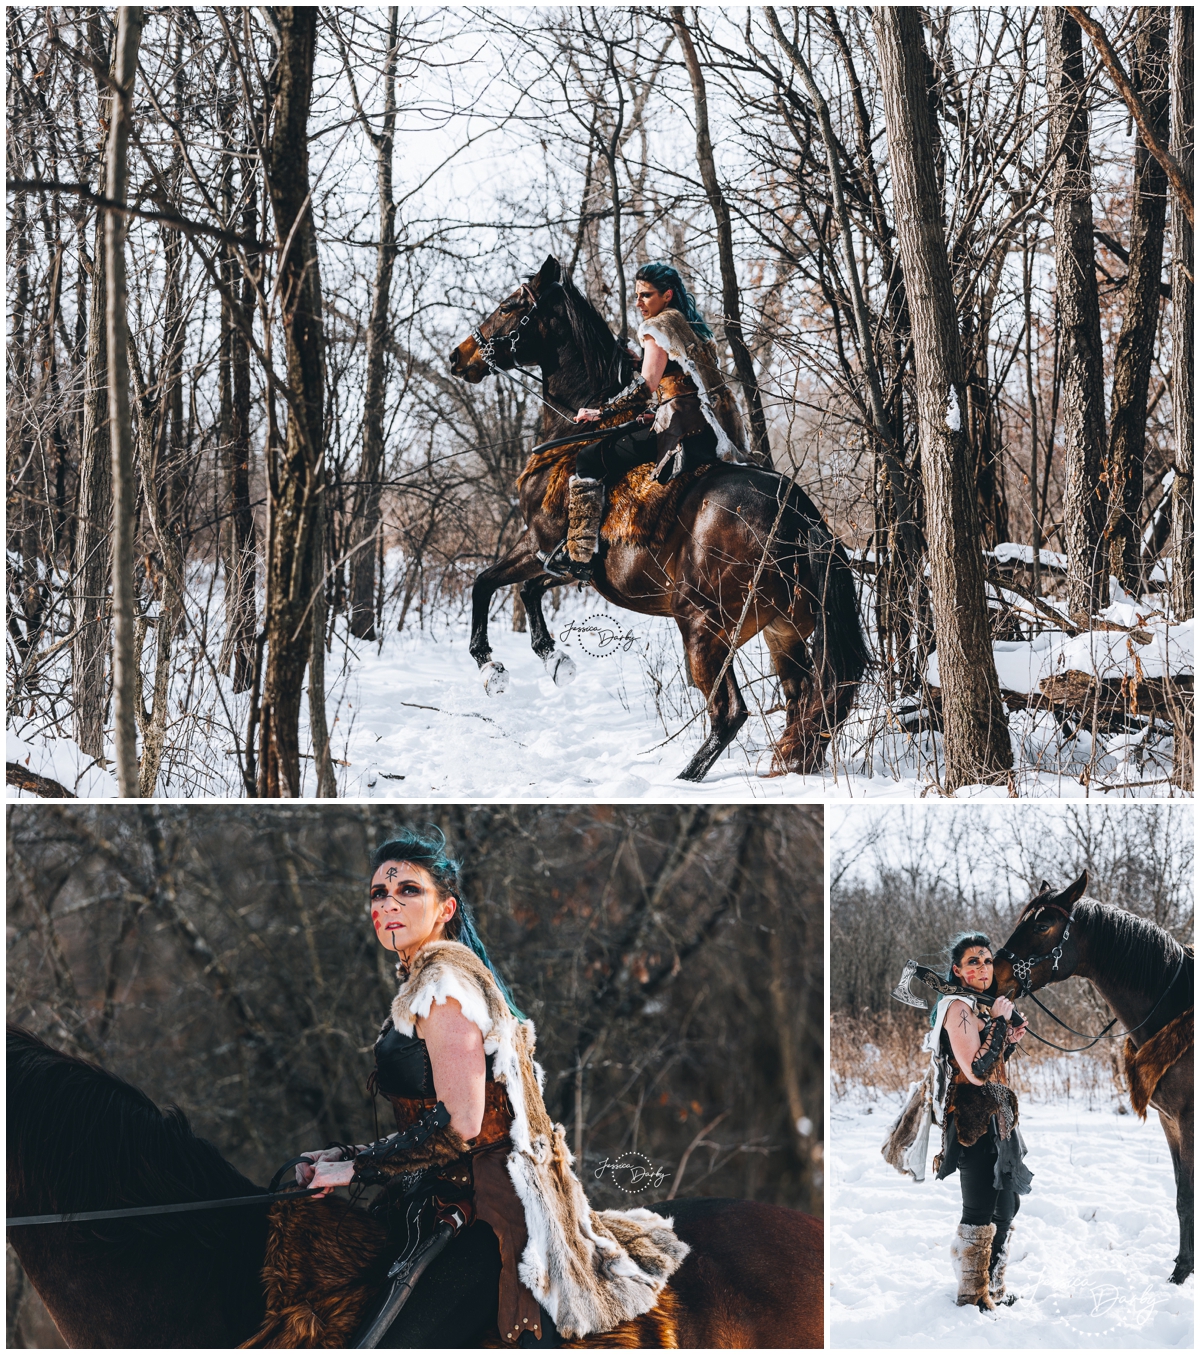 horse and rider Viking portraits of a woman riding horse rearing in the snowy woods